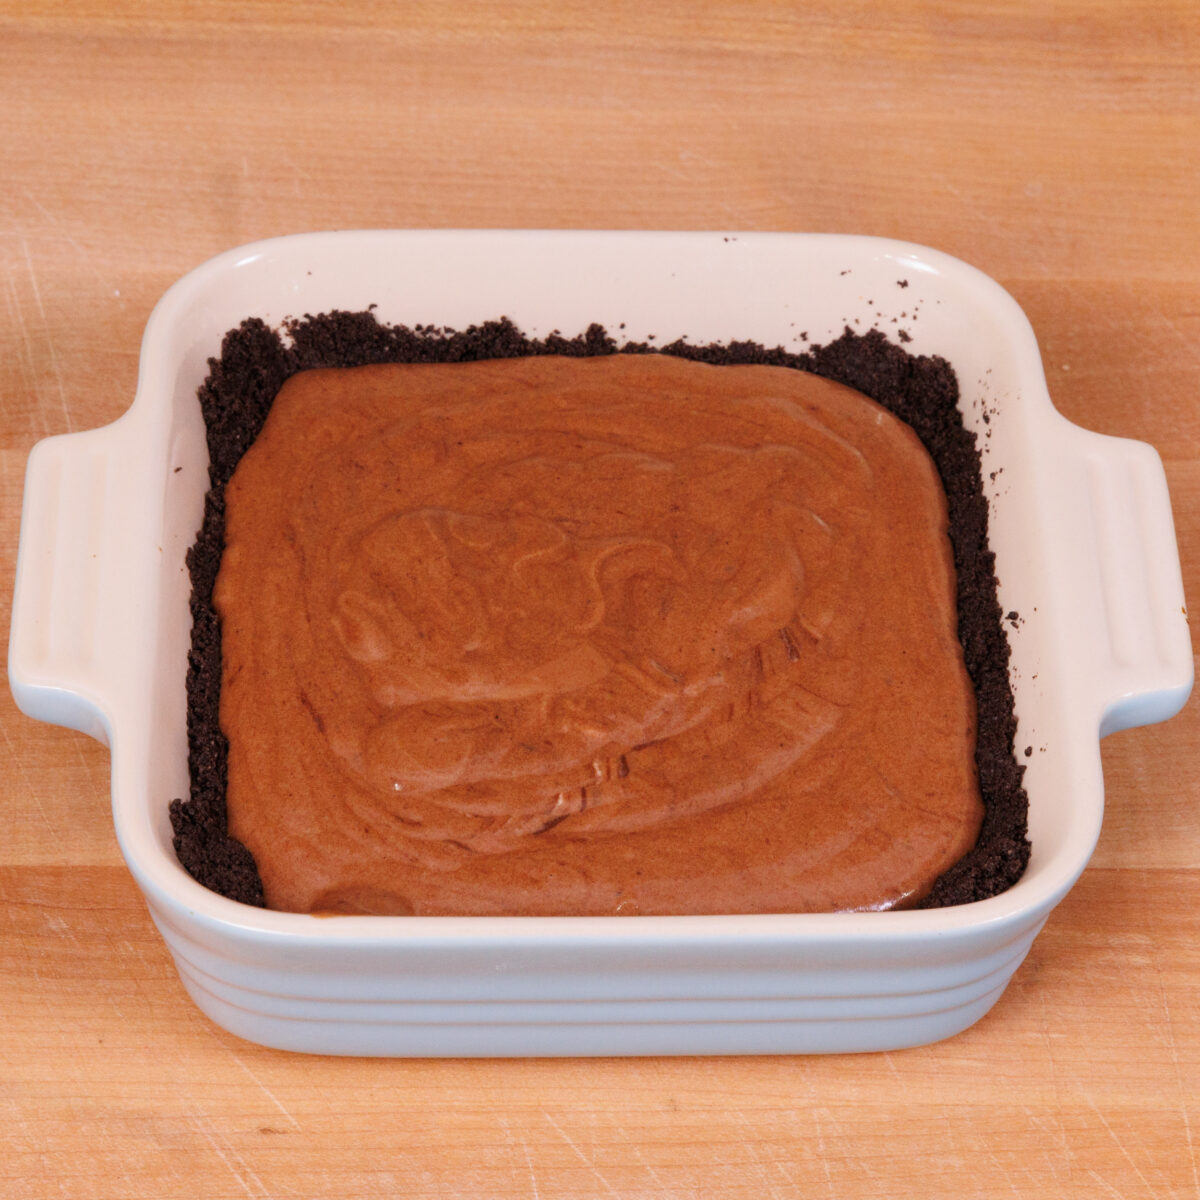 chocolate pudding over an oreo cookie crust in a small baking dish